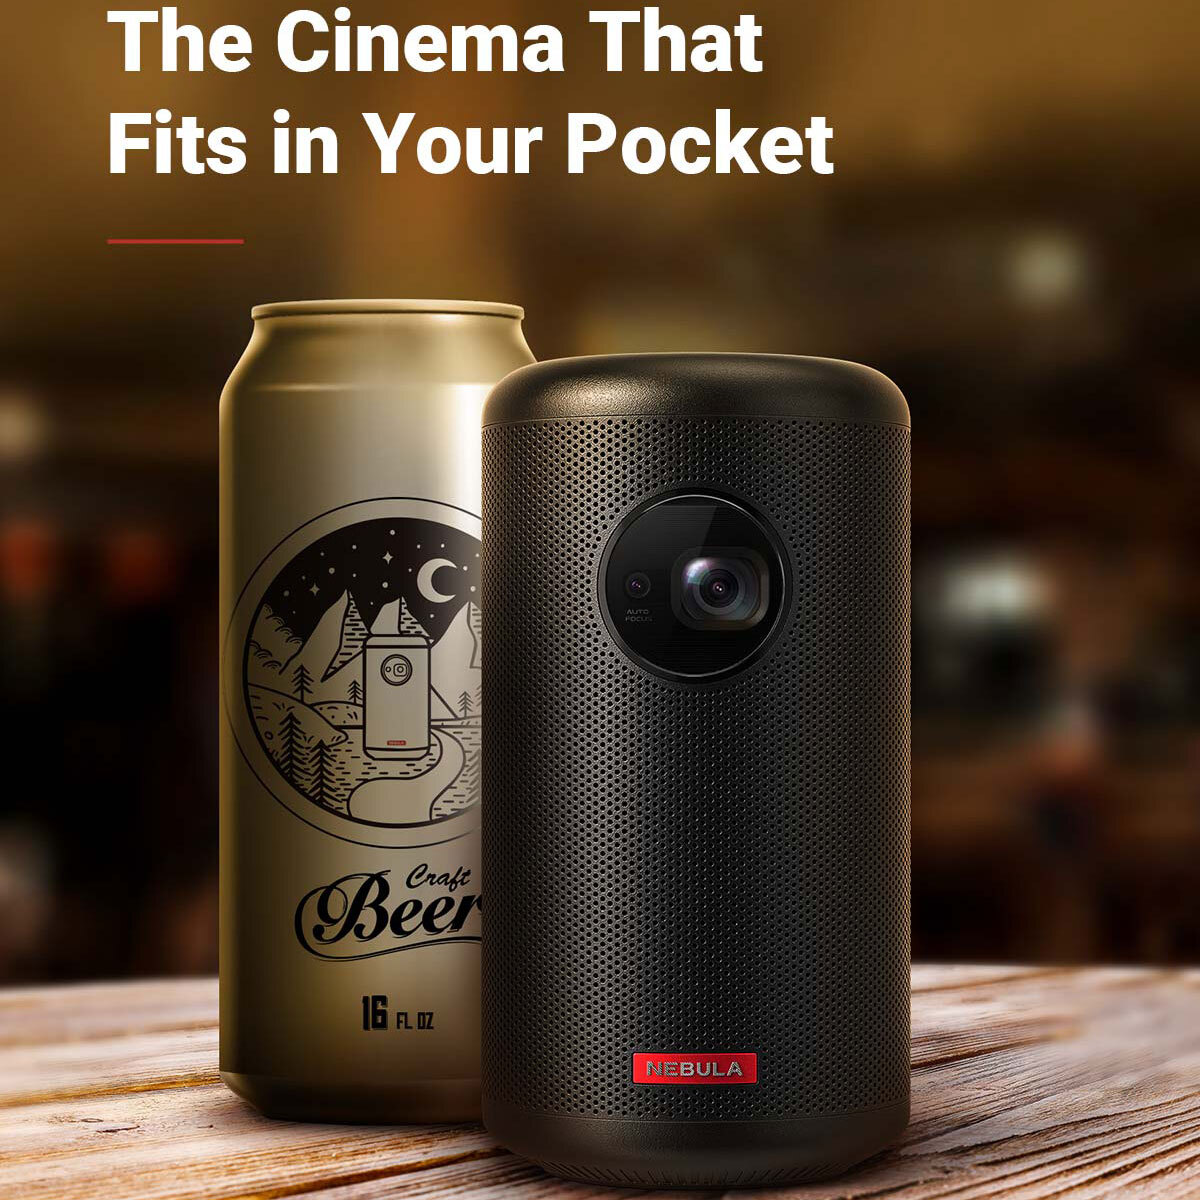 Buy Anker Nebula Capsule II Android Pocket 200 ANSI Lumen Projector at costco.co.uk